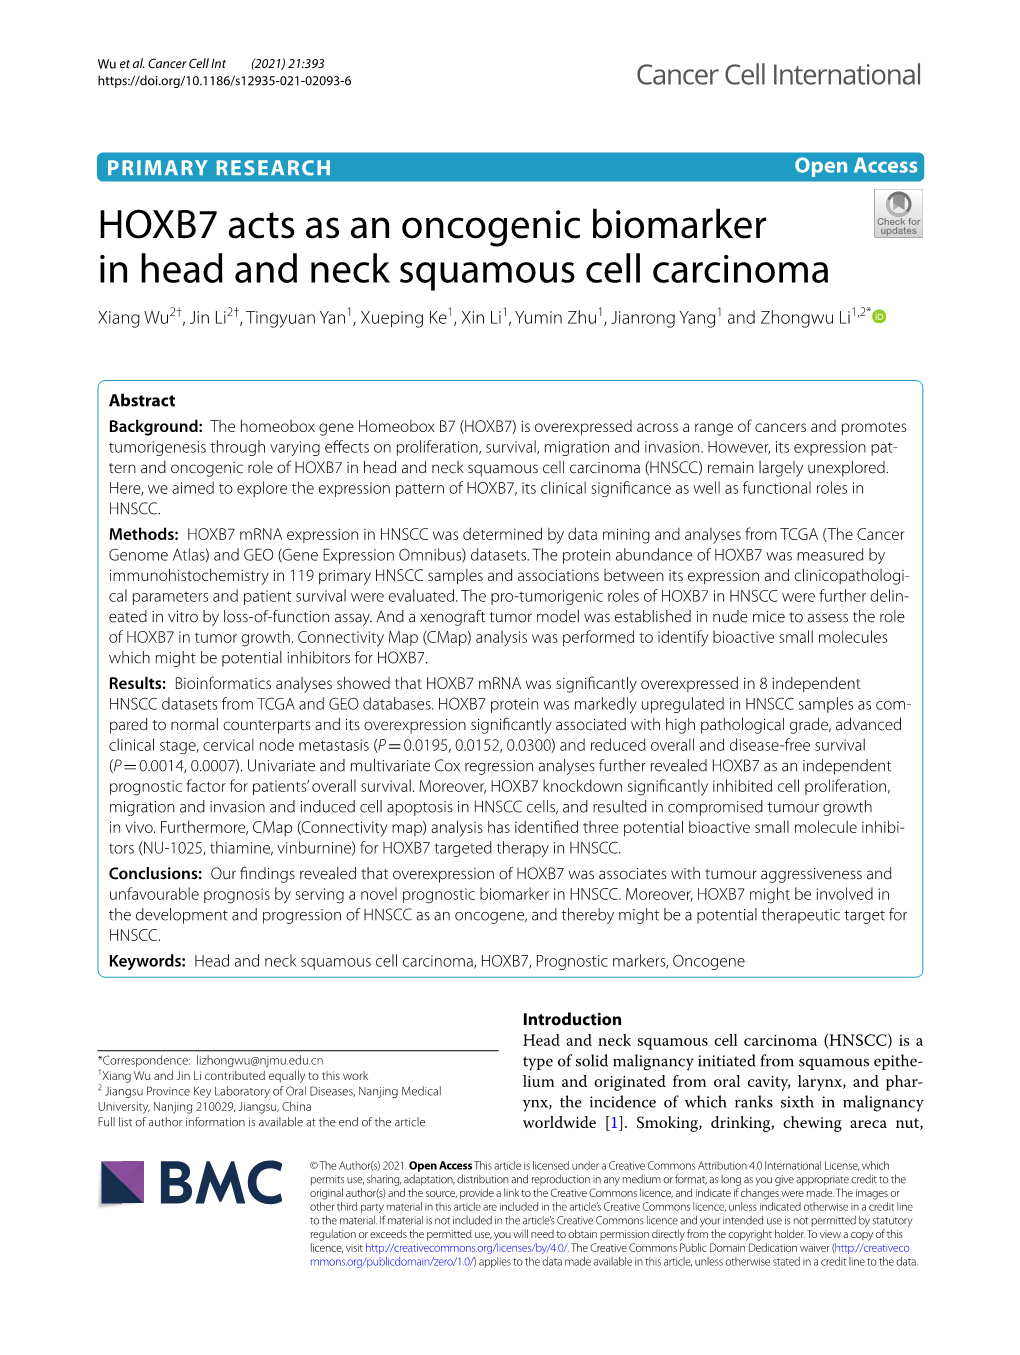 HOXB7 Acts As an Oncogenic Biomarker in Head and Neck